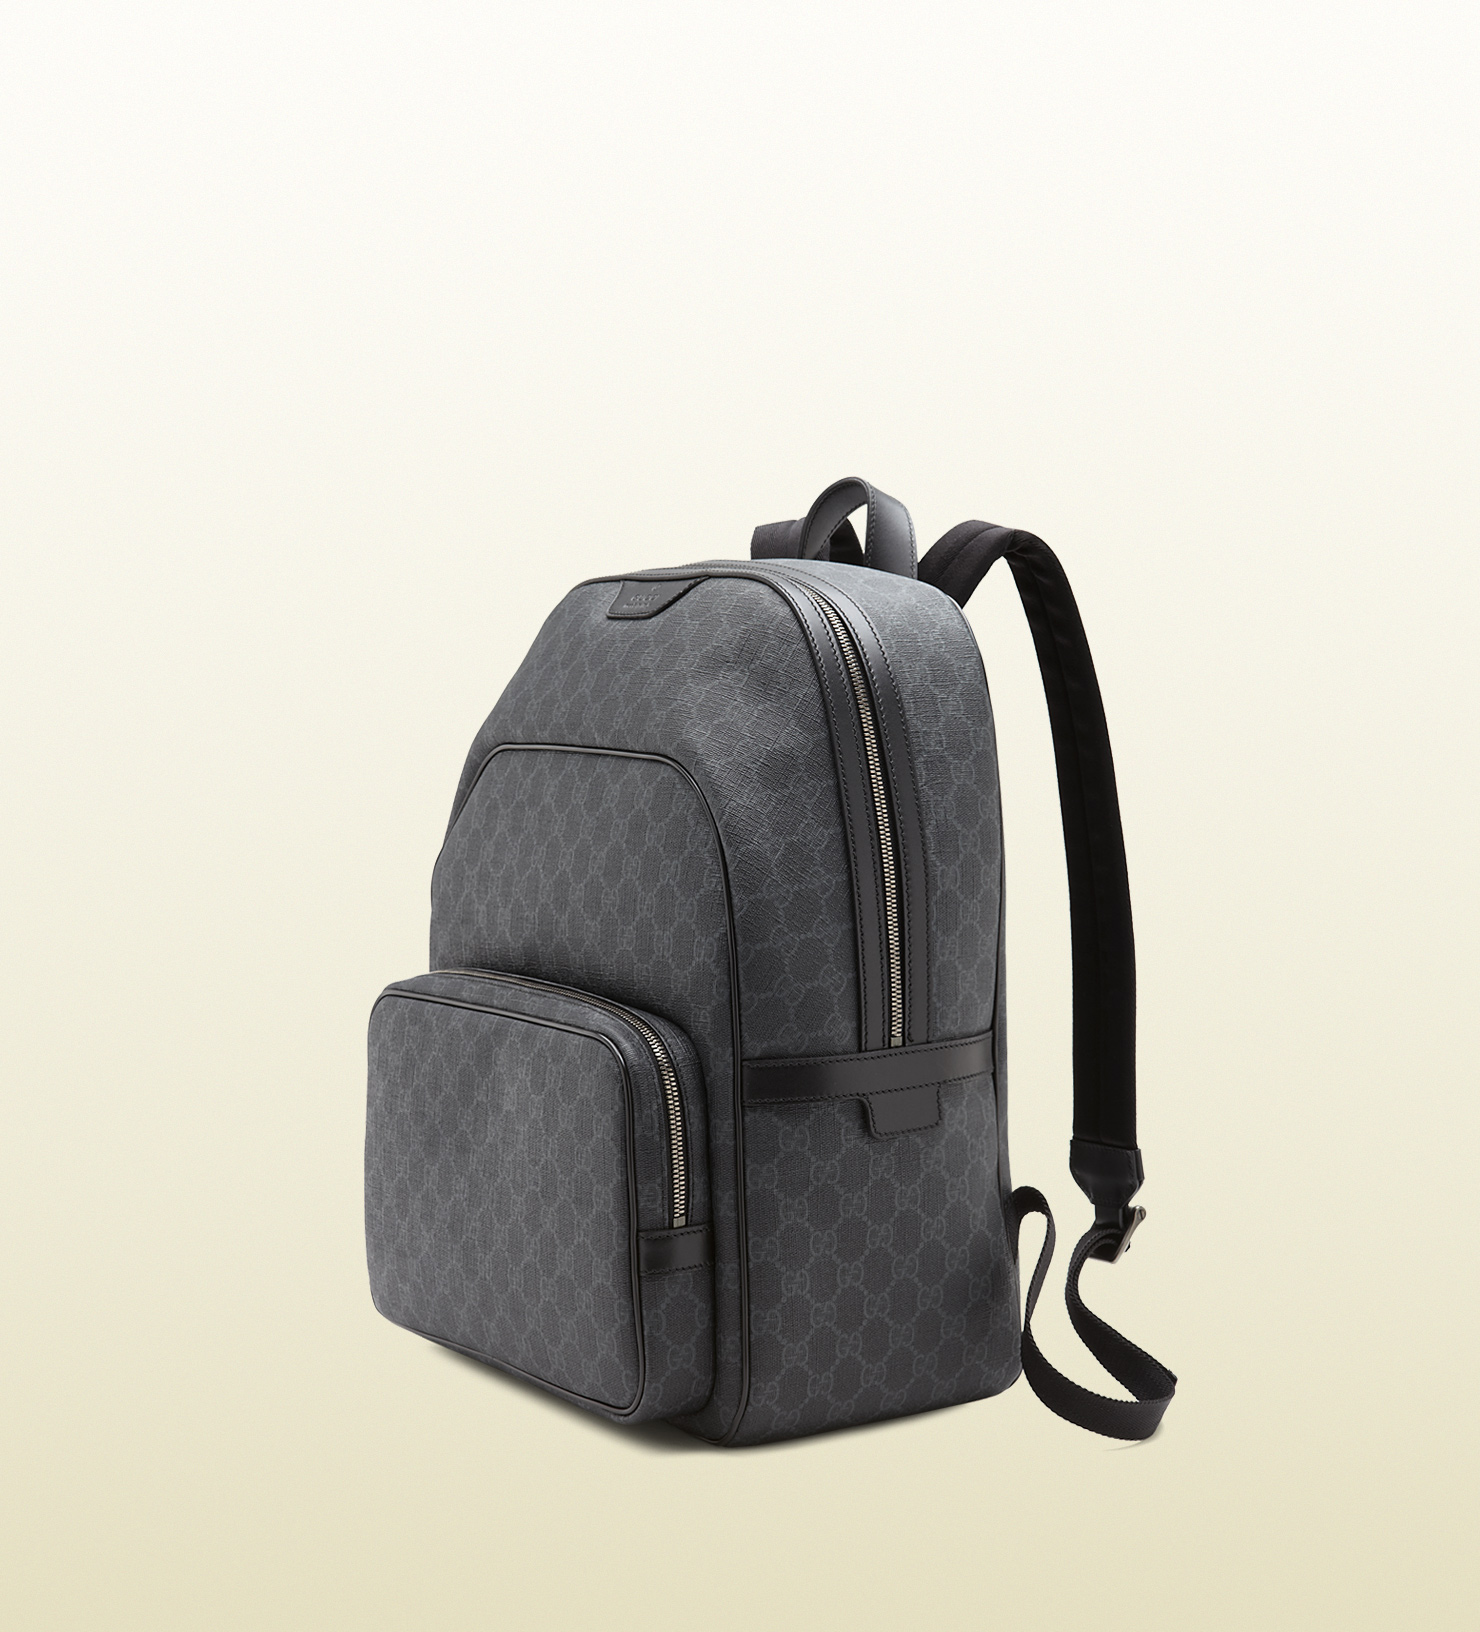 Gucci Gg Supreme Canvas Backpack in Grey (Gray) for Men - Lyst